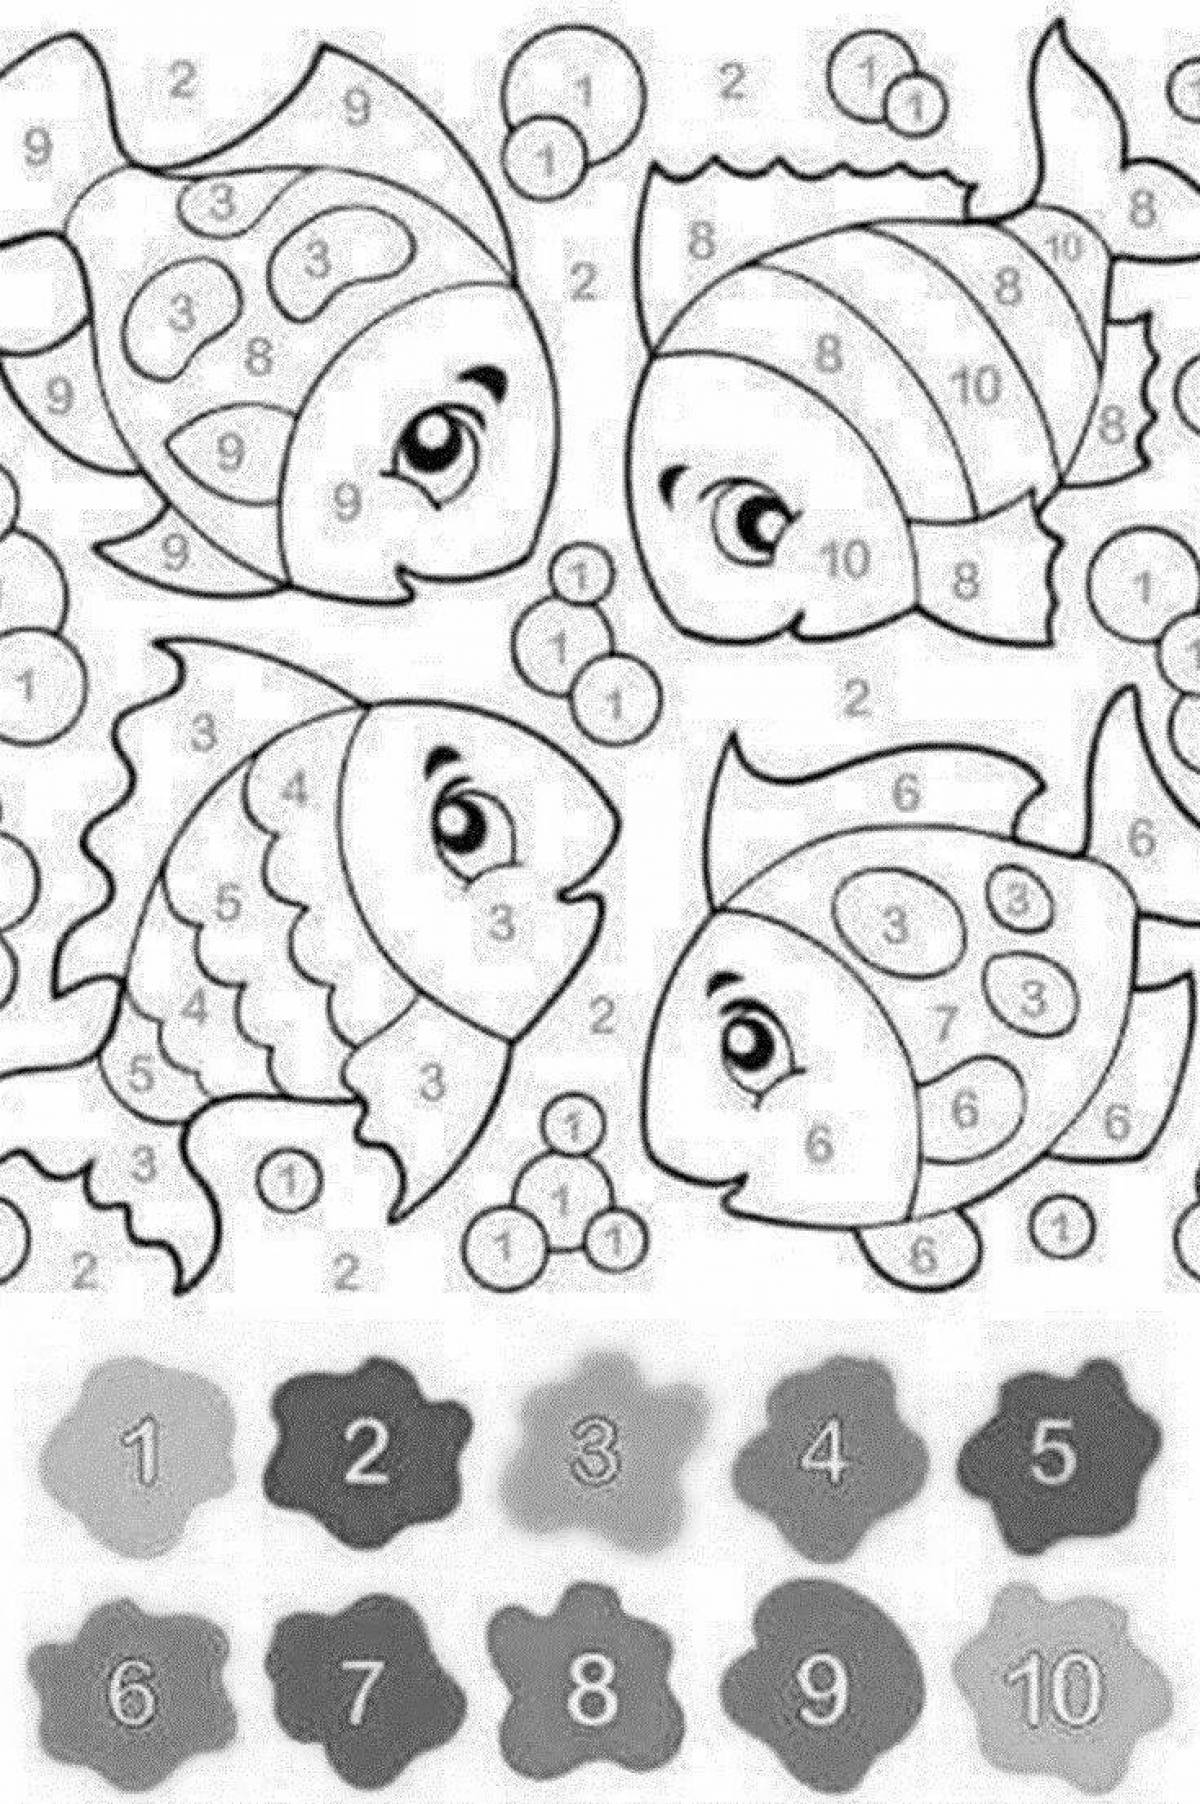 Adorable fish by number coloring book